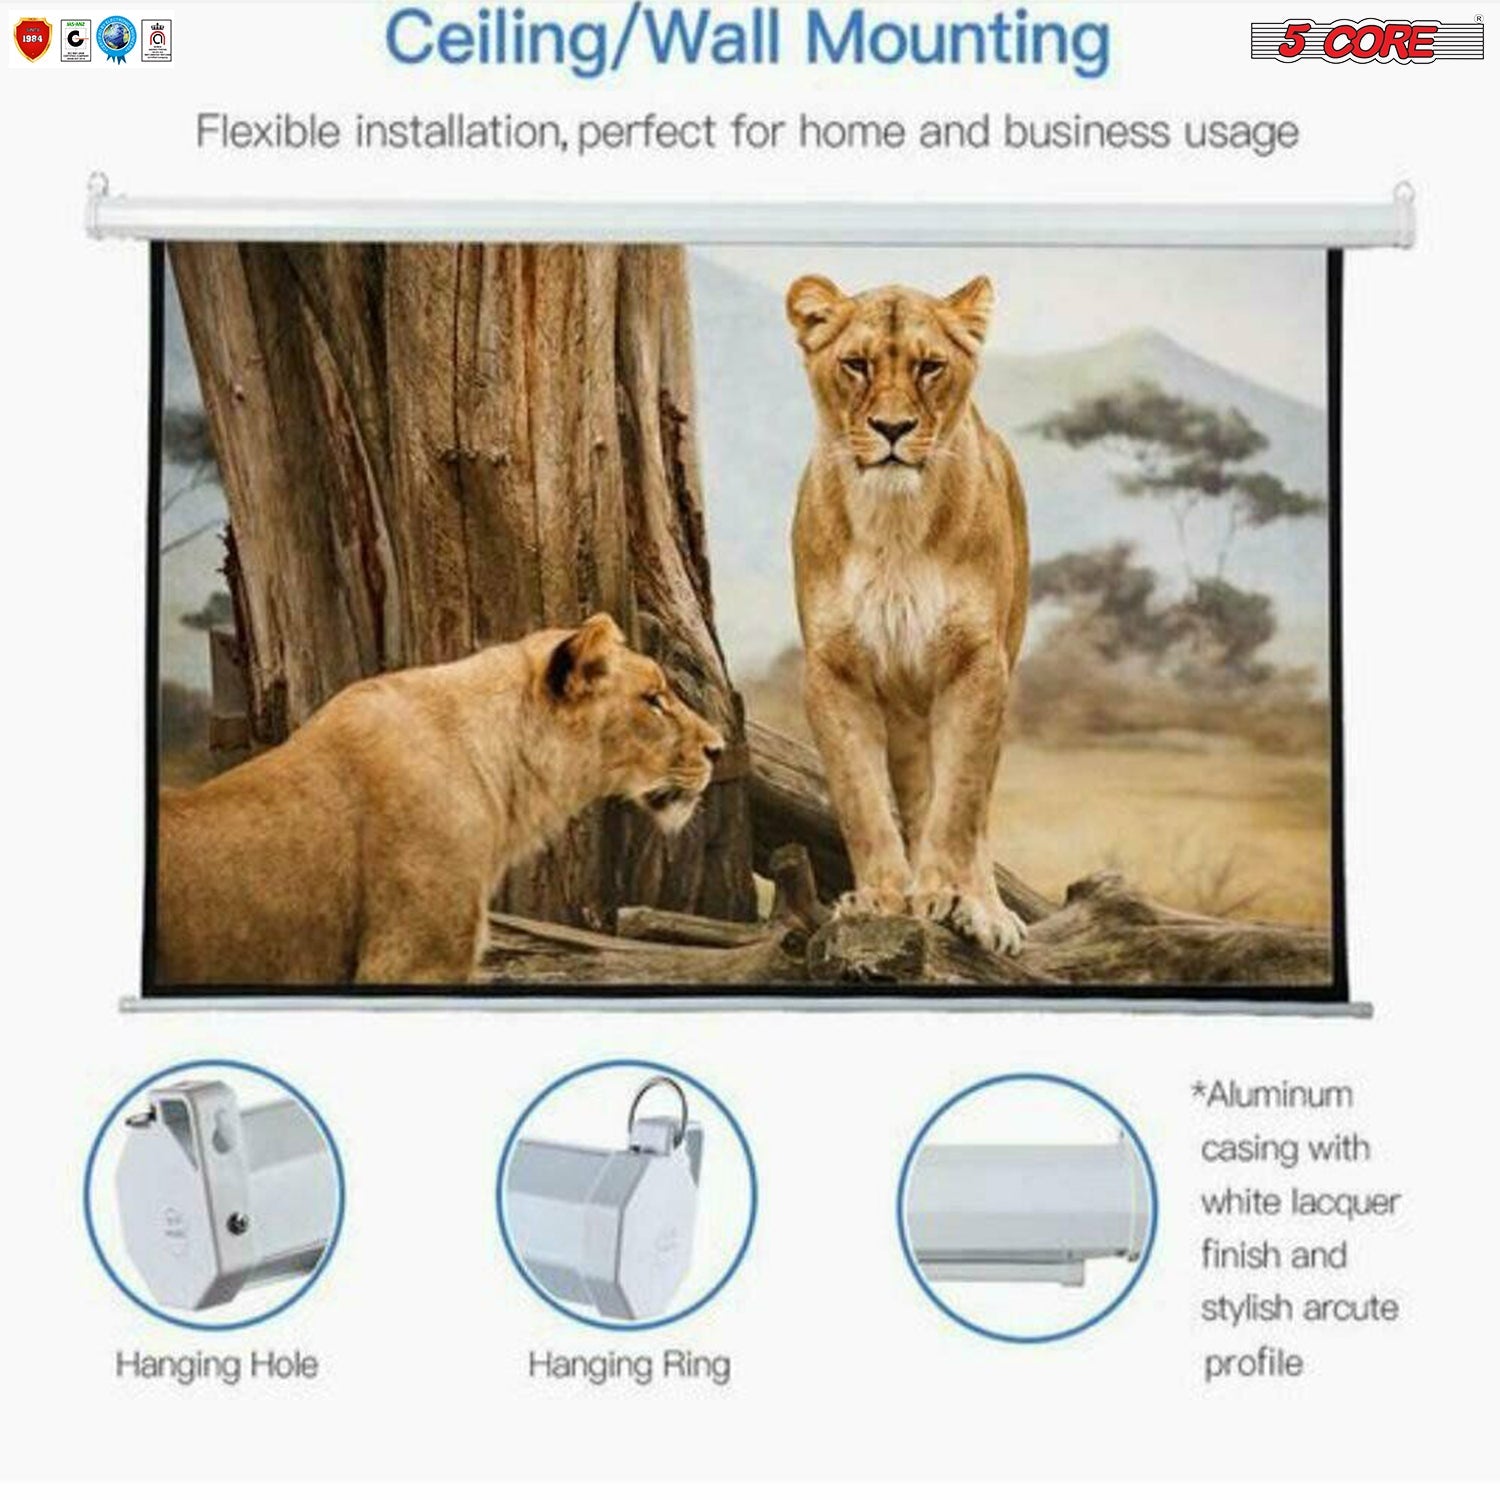 Retractable Projector Screen Projection - 100 inch - The Big Screen Store